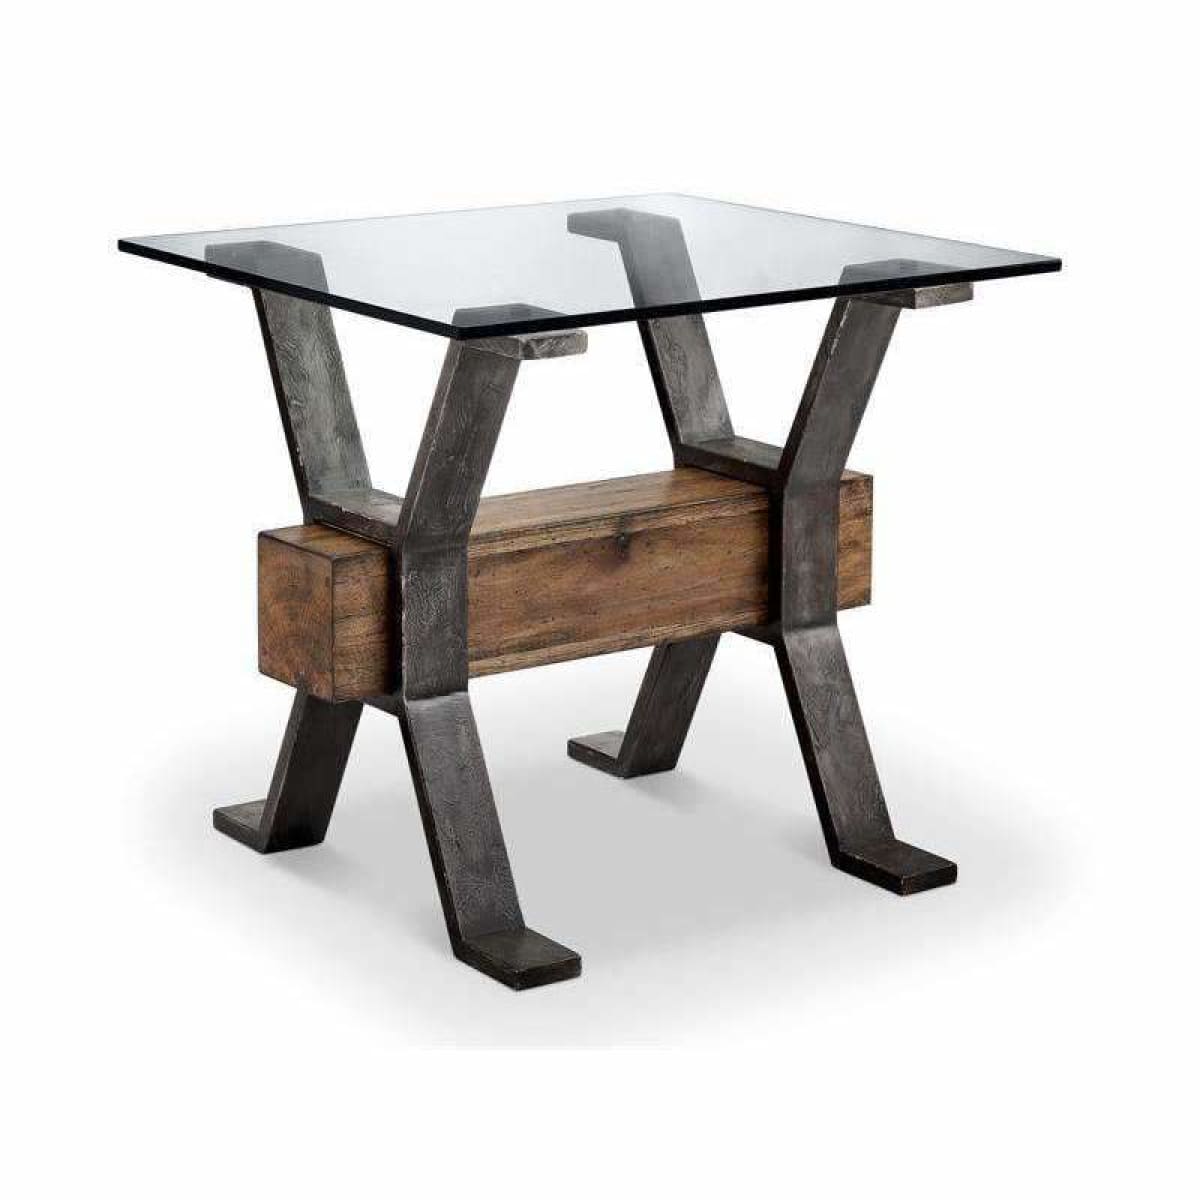 Sawyer Rectangular End Table - END TABLE/SIDE TABLE